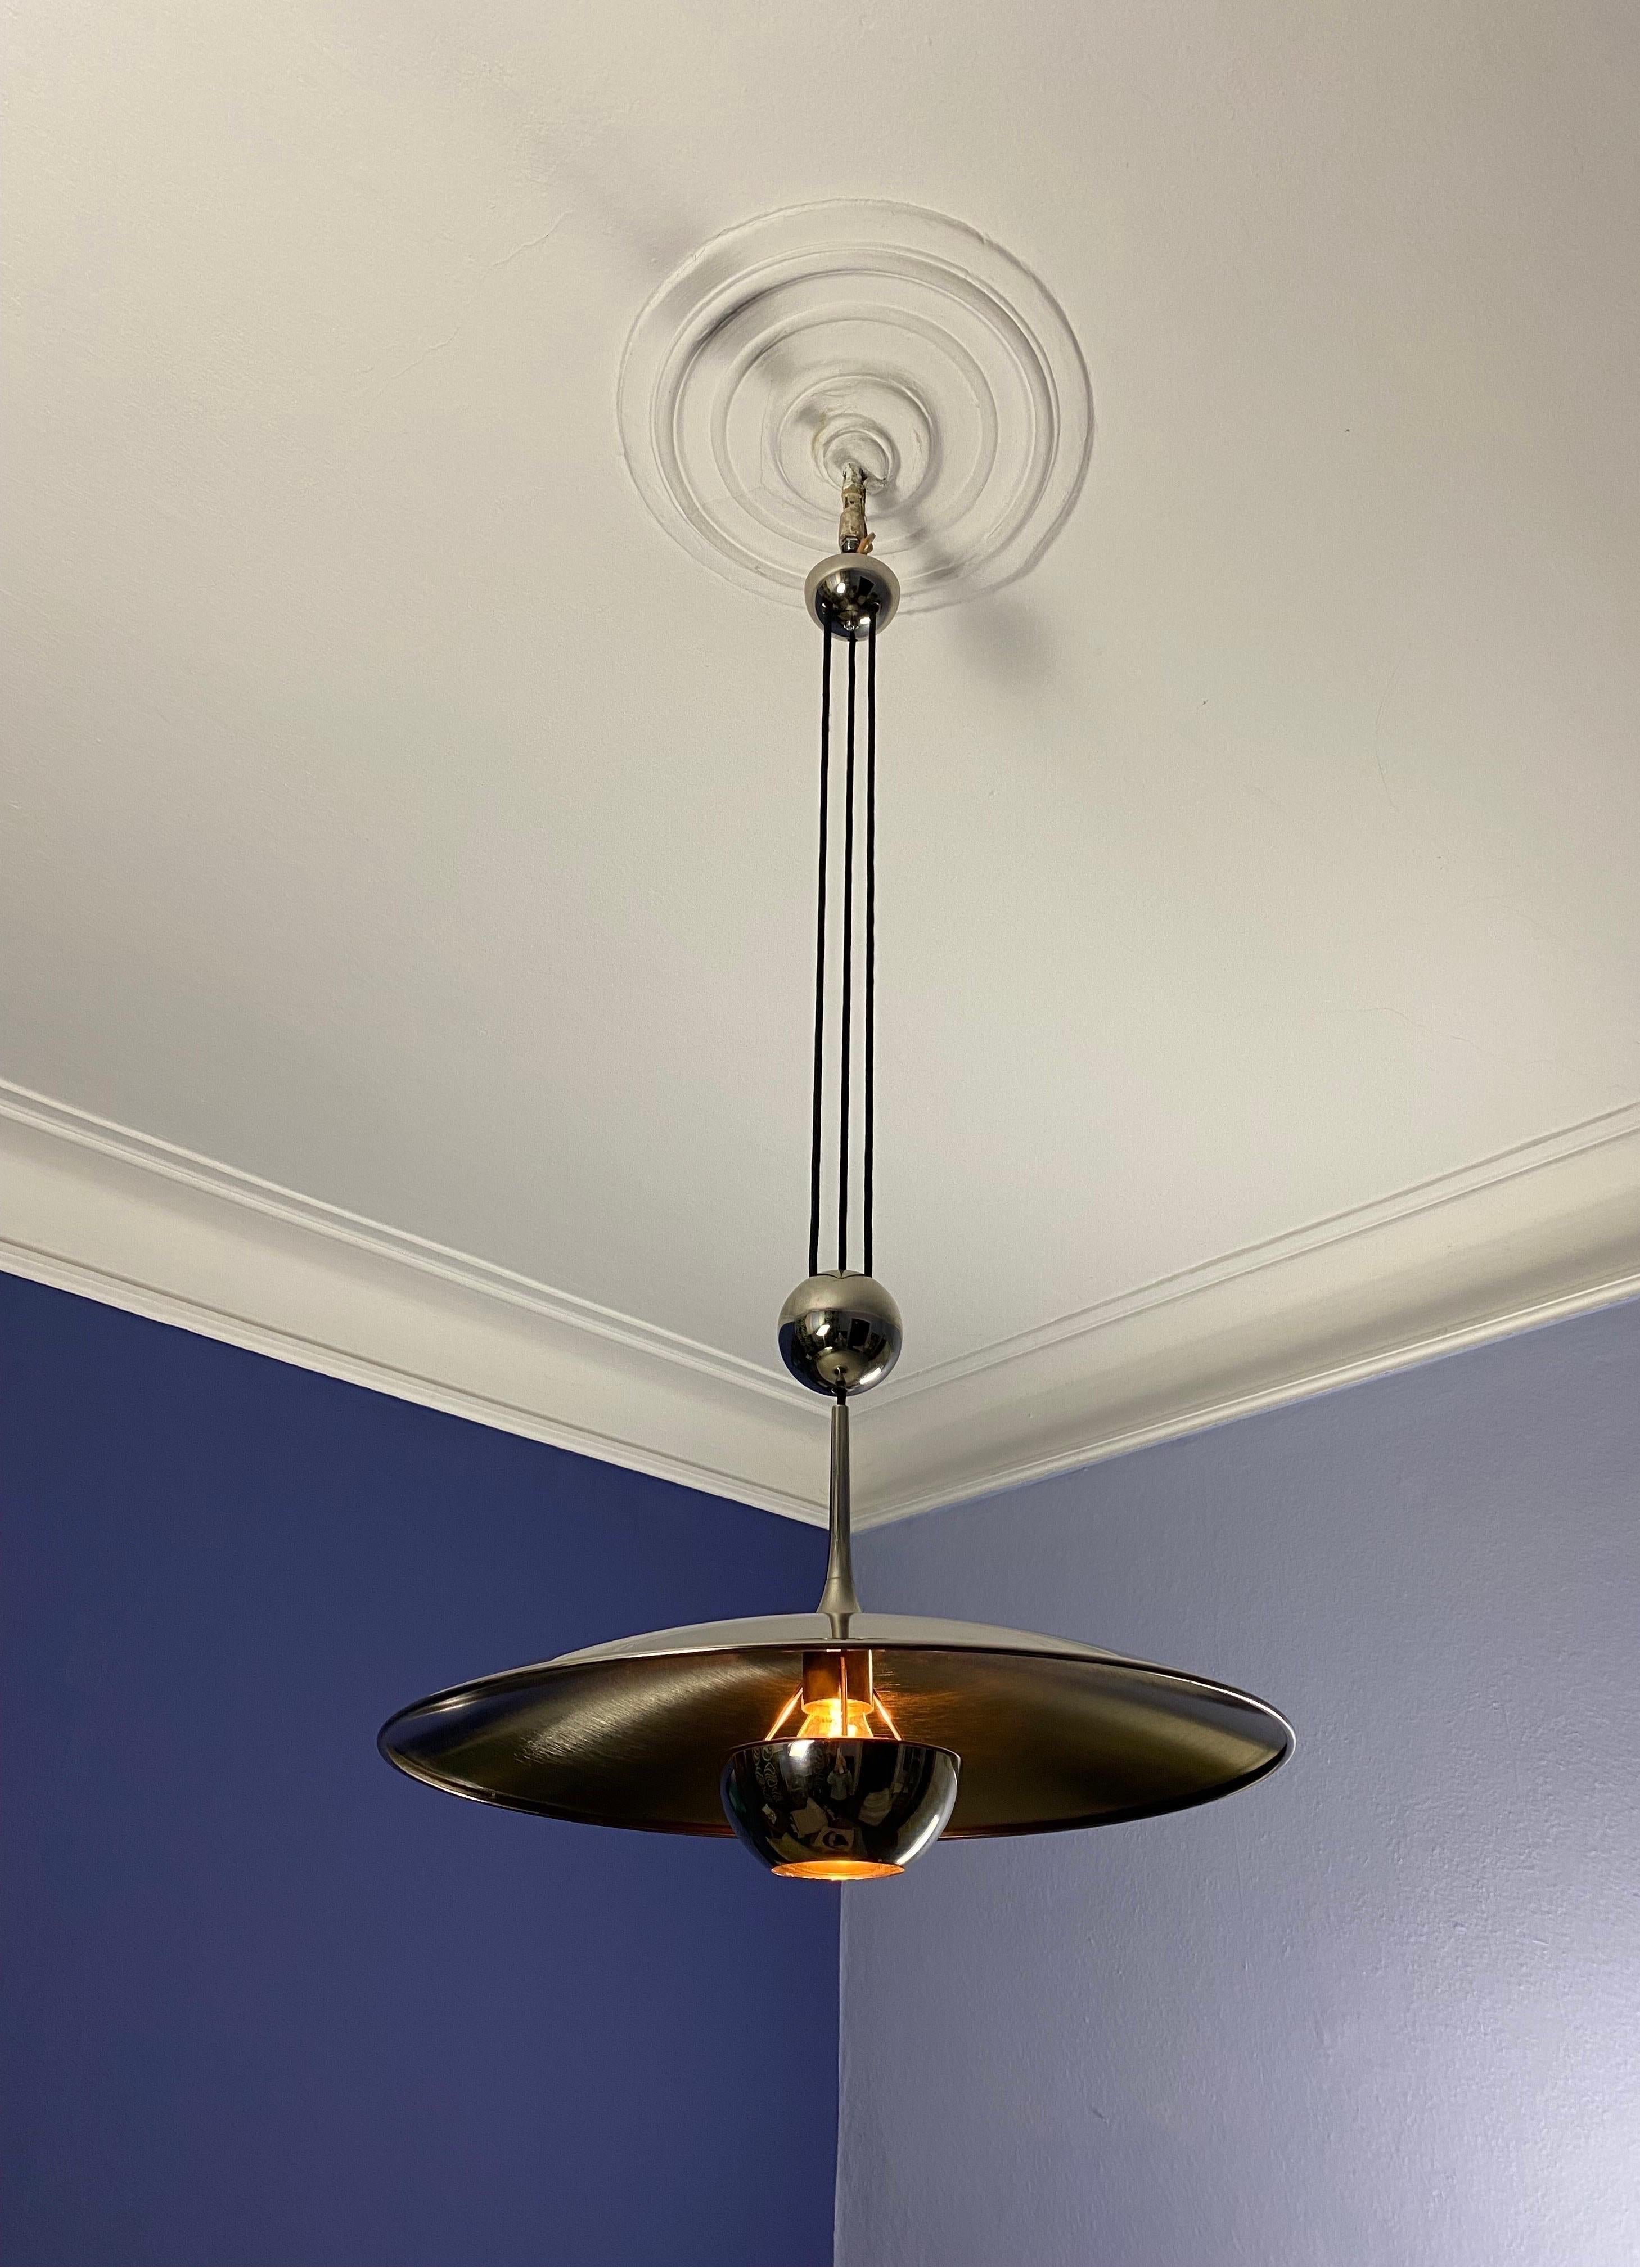 Mid-Century Modern Adjustable  Pendant Onos55 by Florian Schulz with a Central Counterweight